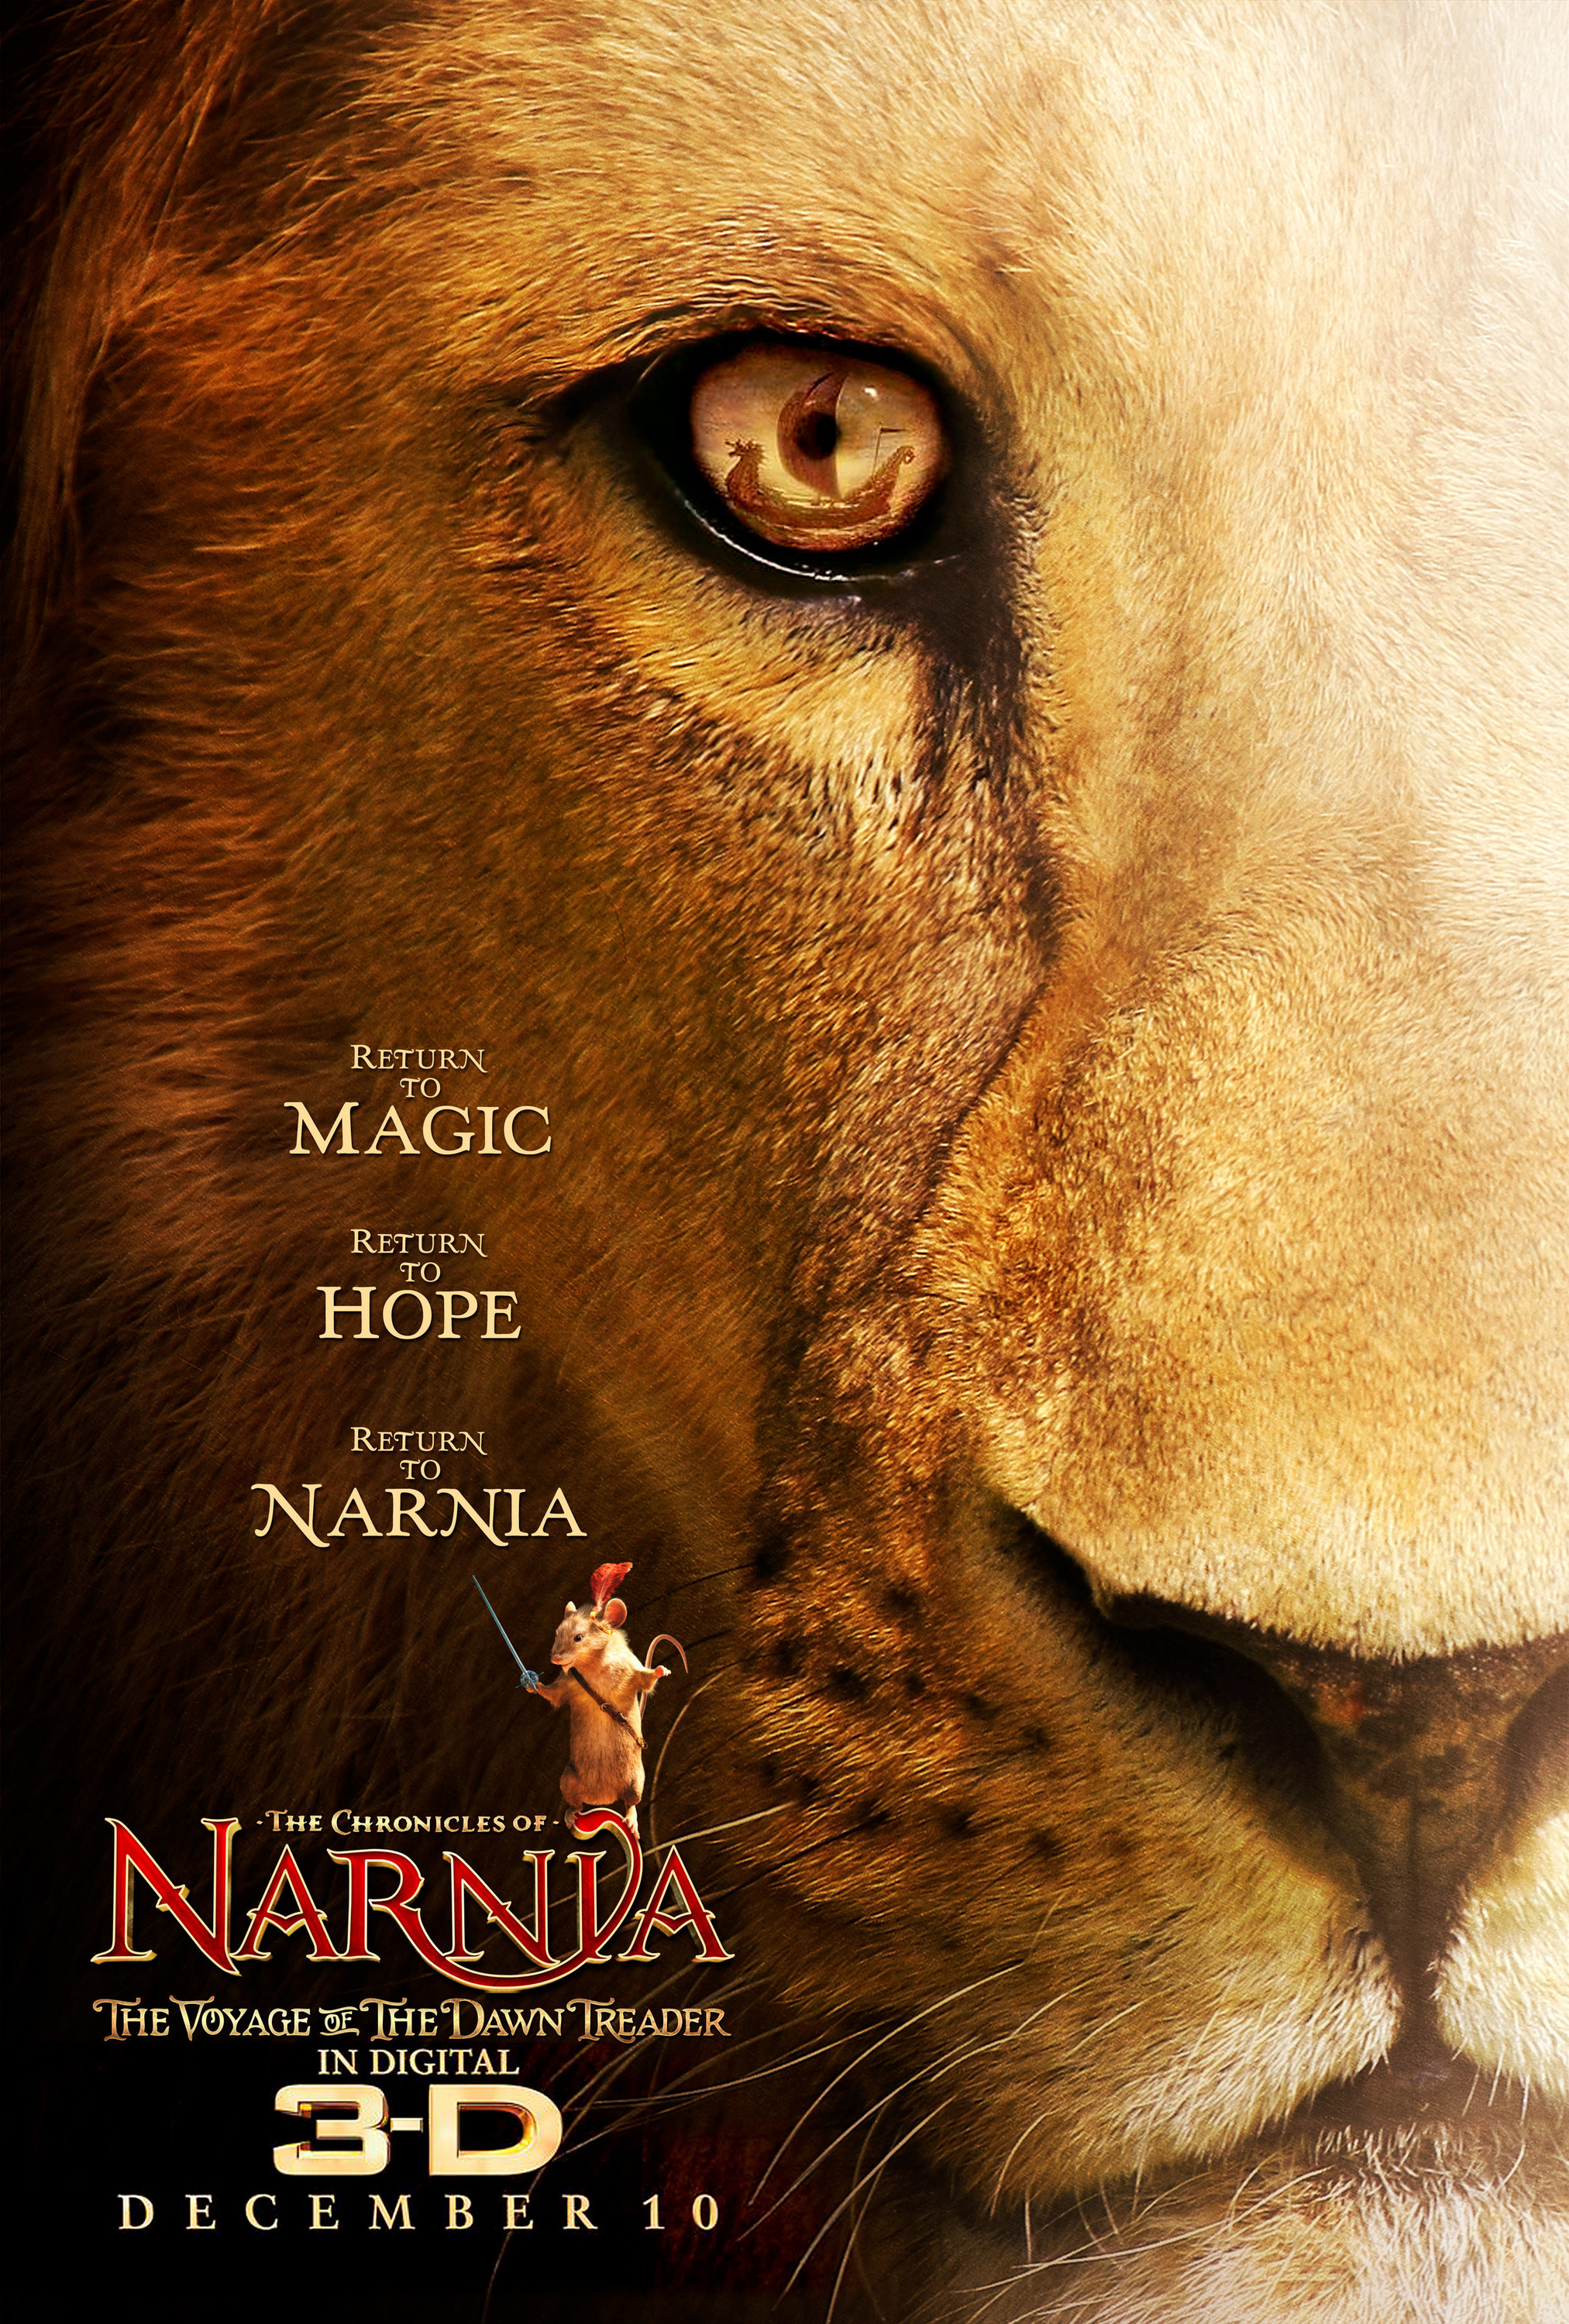 Mega Sized Movie Poster Image for The Chronicles of Narnia: The Voyage of the Dawn Treader (#1 of 7)